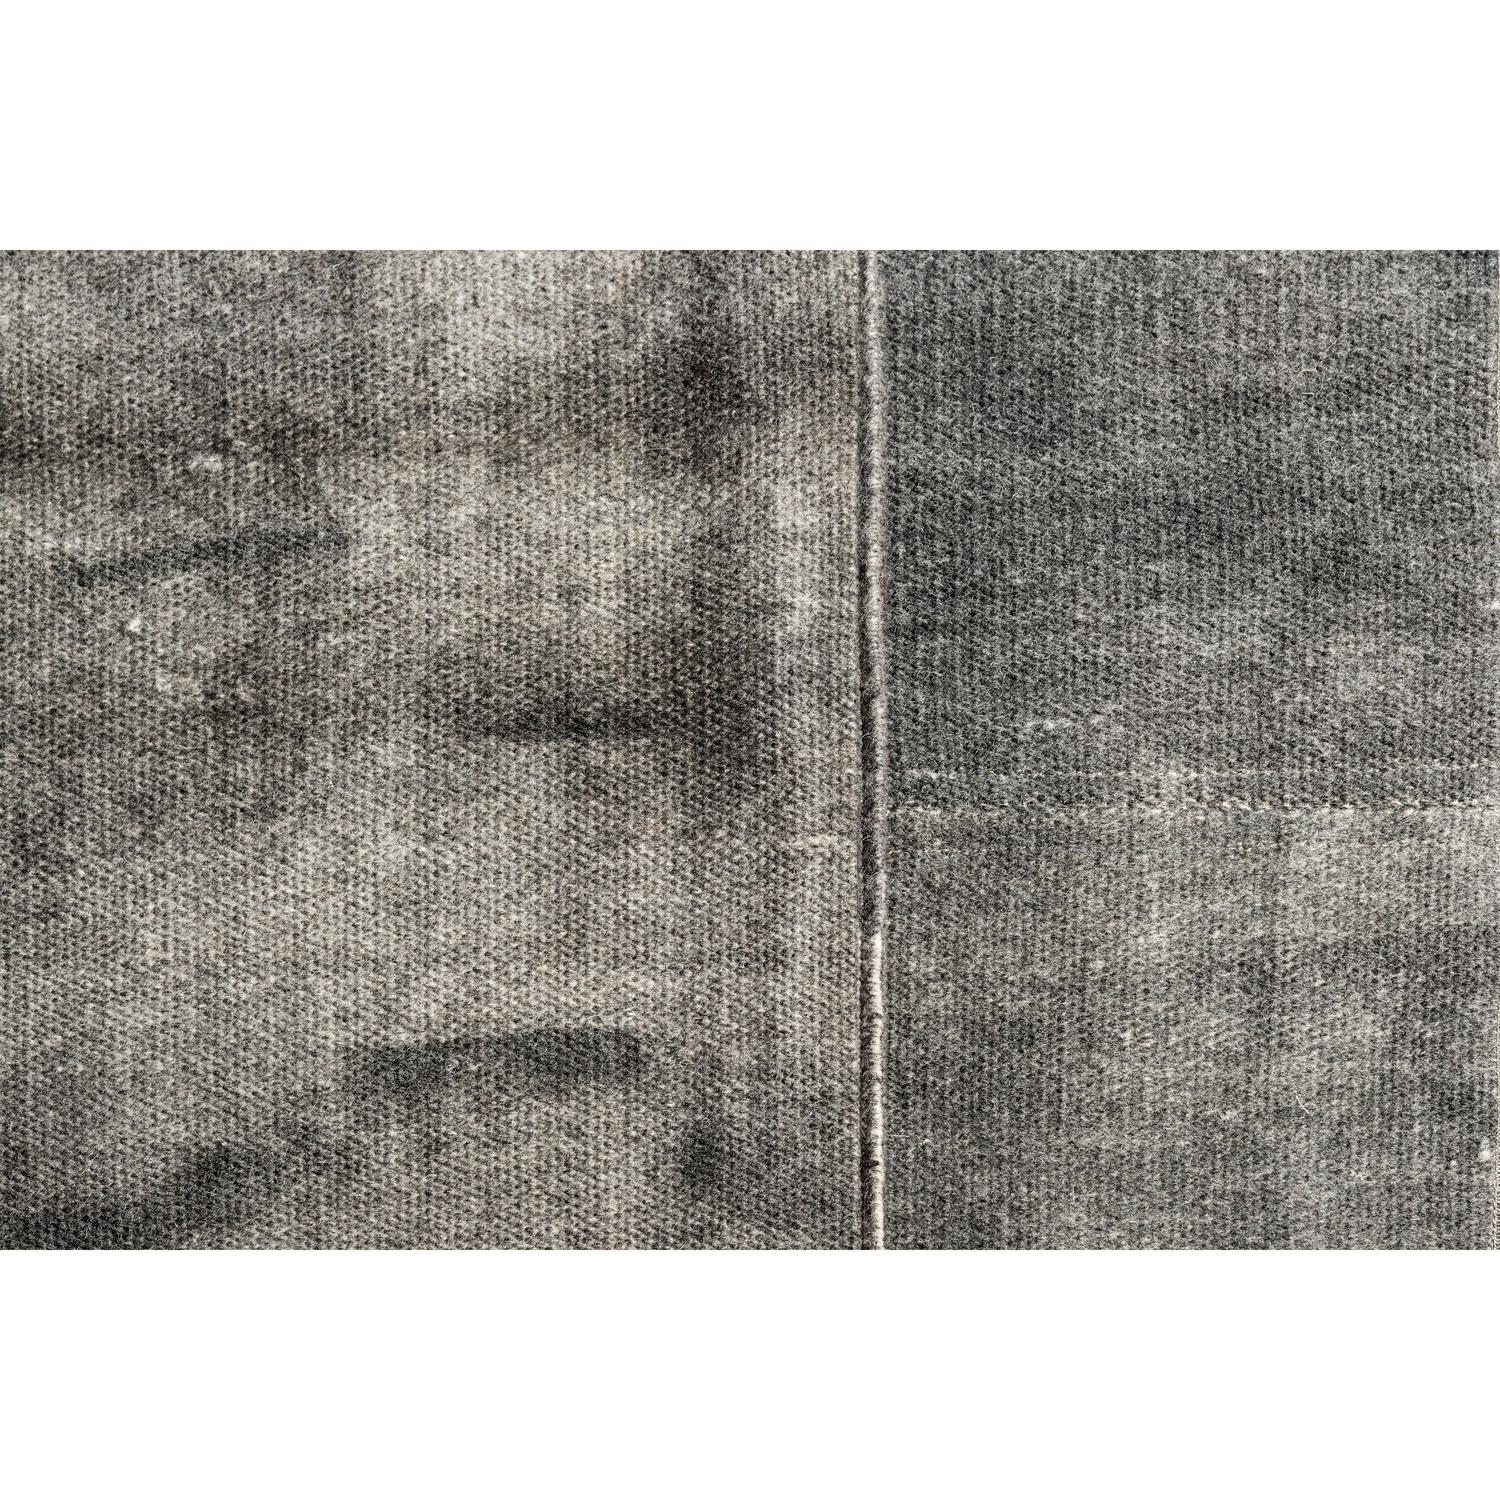 Hand-Woven 21st Century Wool Thin Natural Washable Grey Rug by Deanna Comellini 260x350 cm For Sale